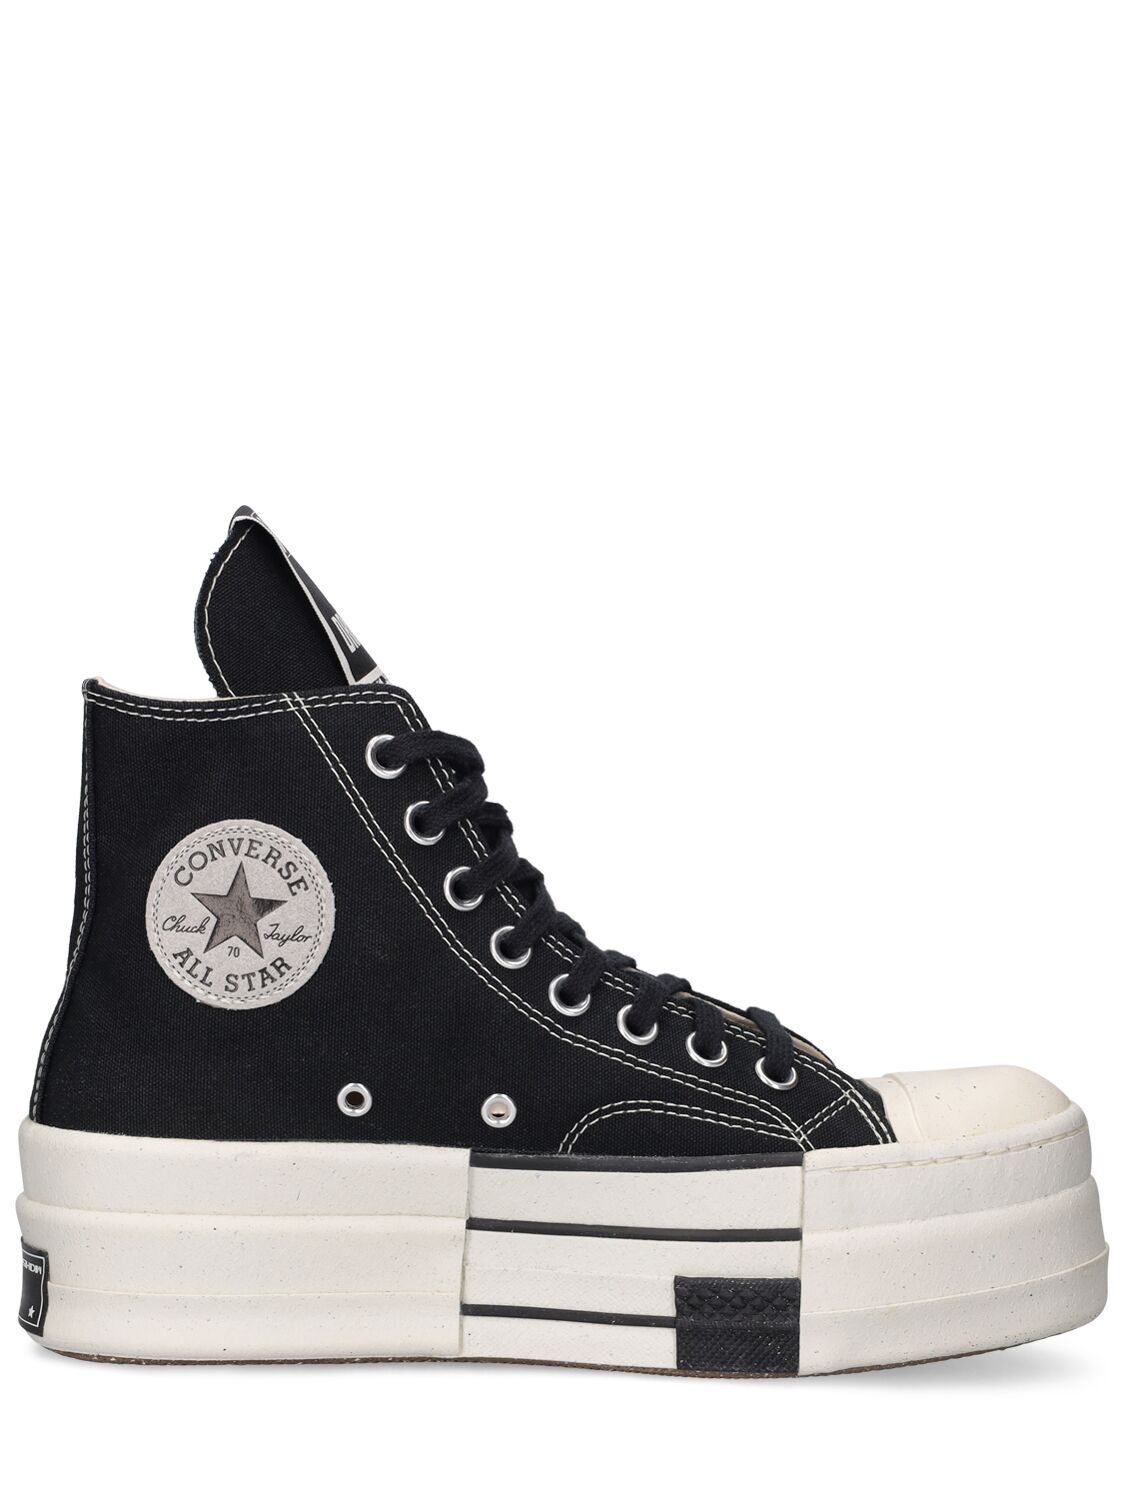 Dbl Drkstar Hi Canvas High Top Sneakers – WOMEN > SHOES > SNEAKERS